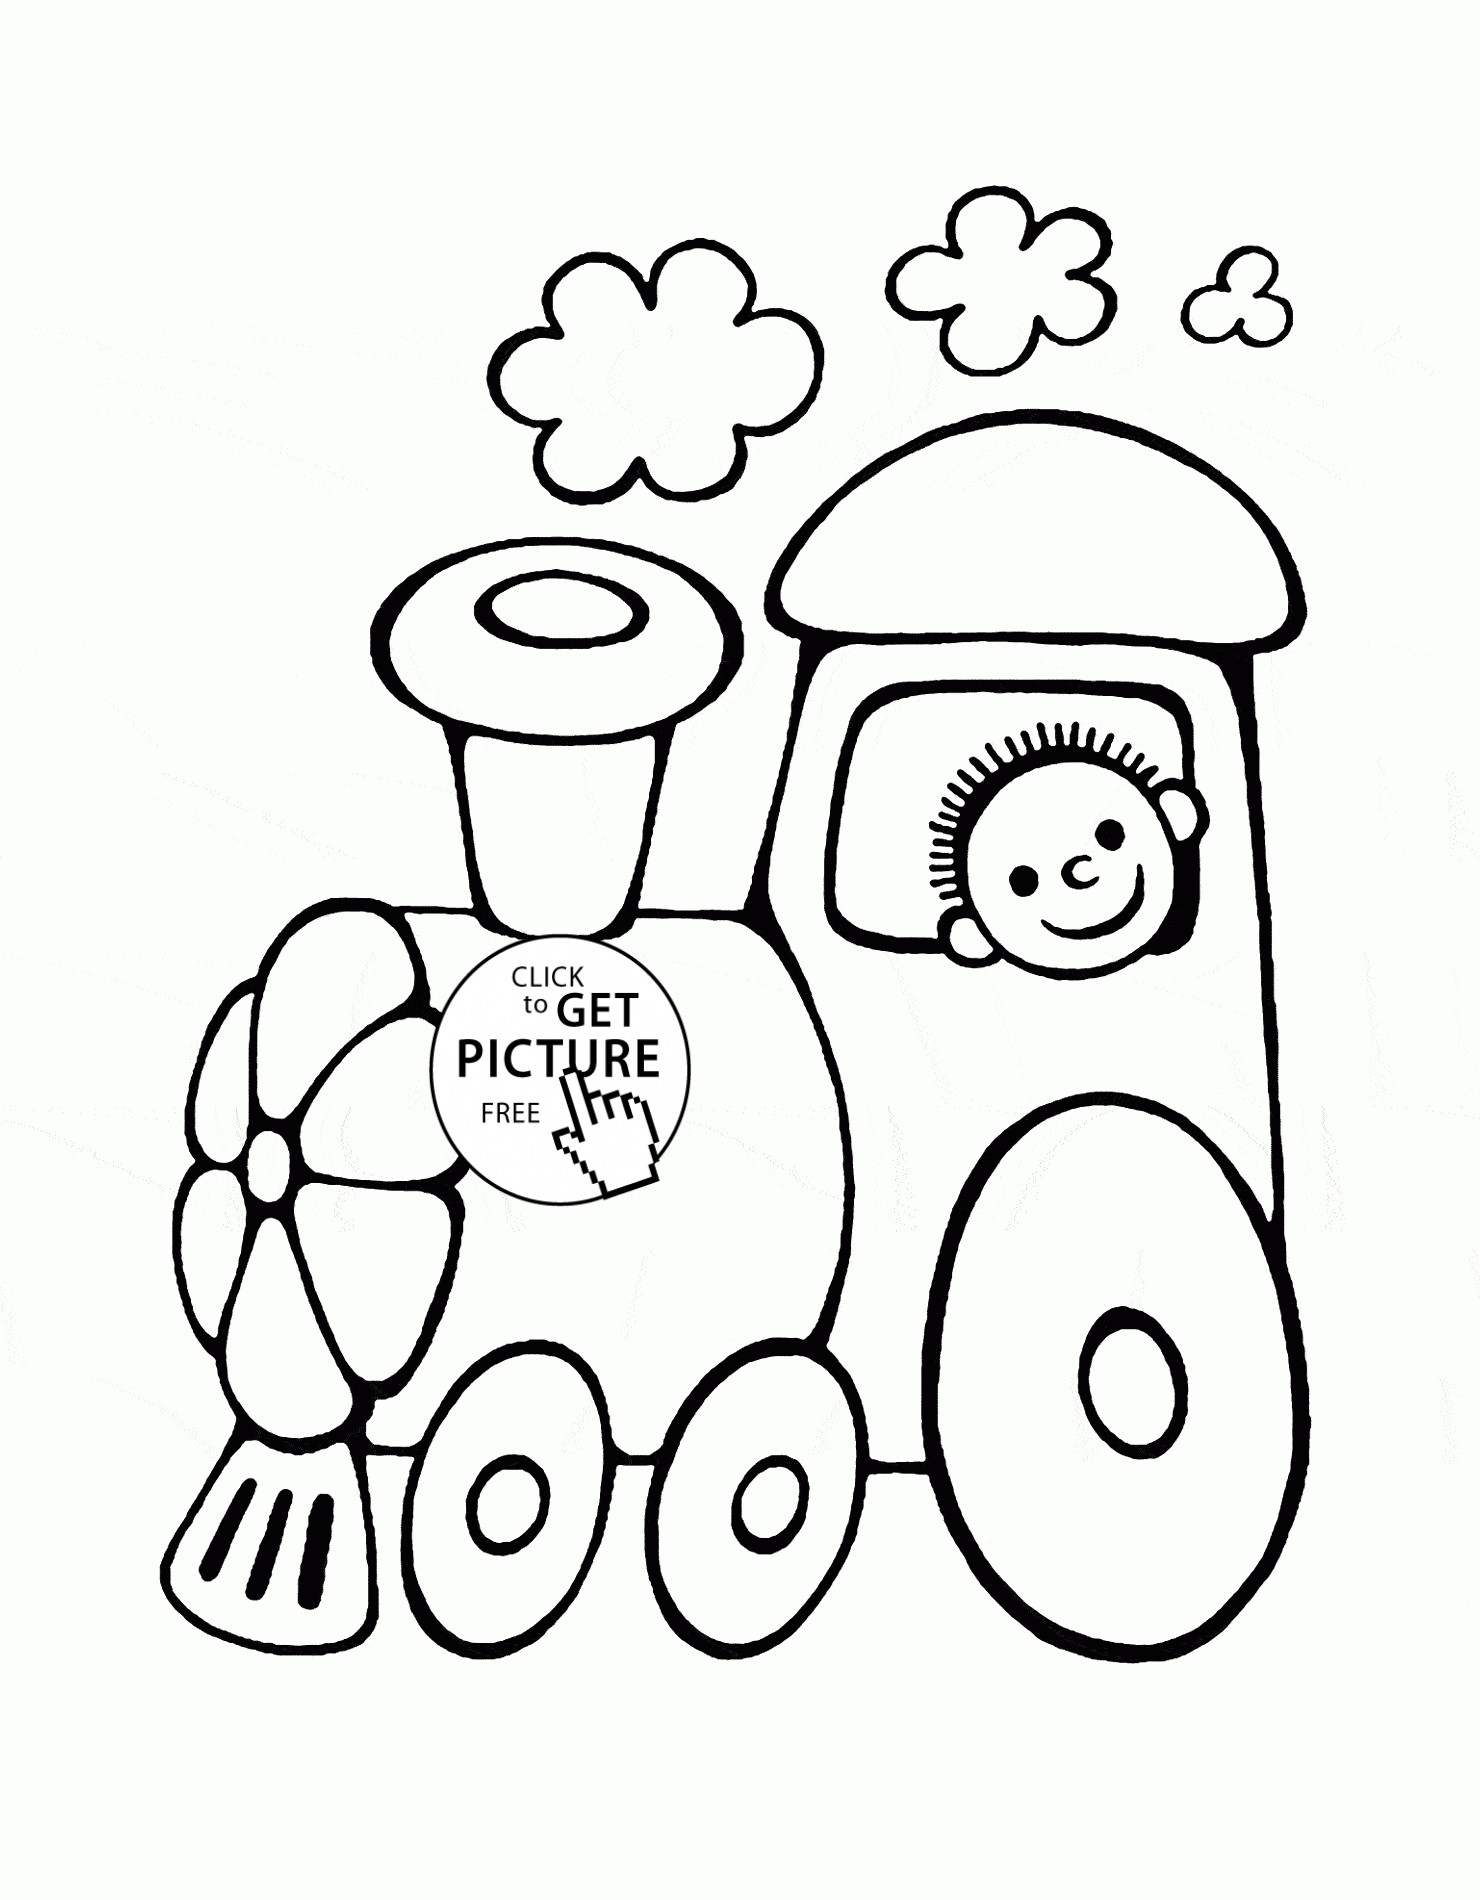 Train Coloring Pages For Toddlers
 Funny Cartoon Train coloring page for toddlers